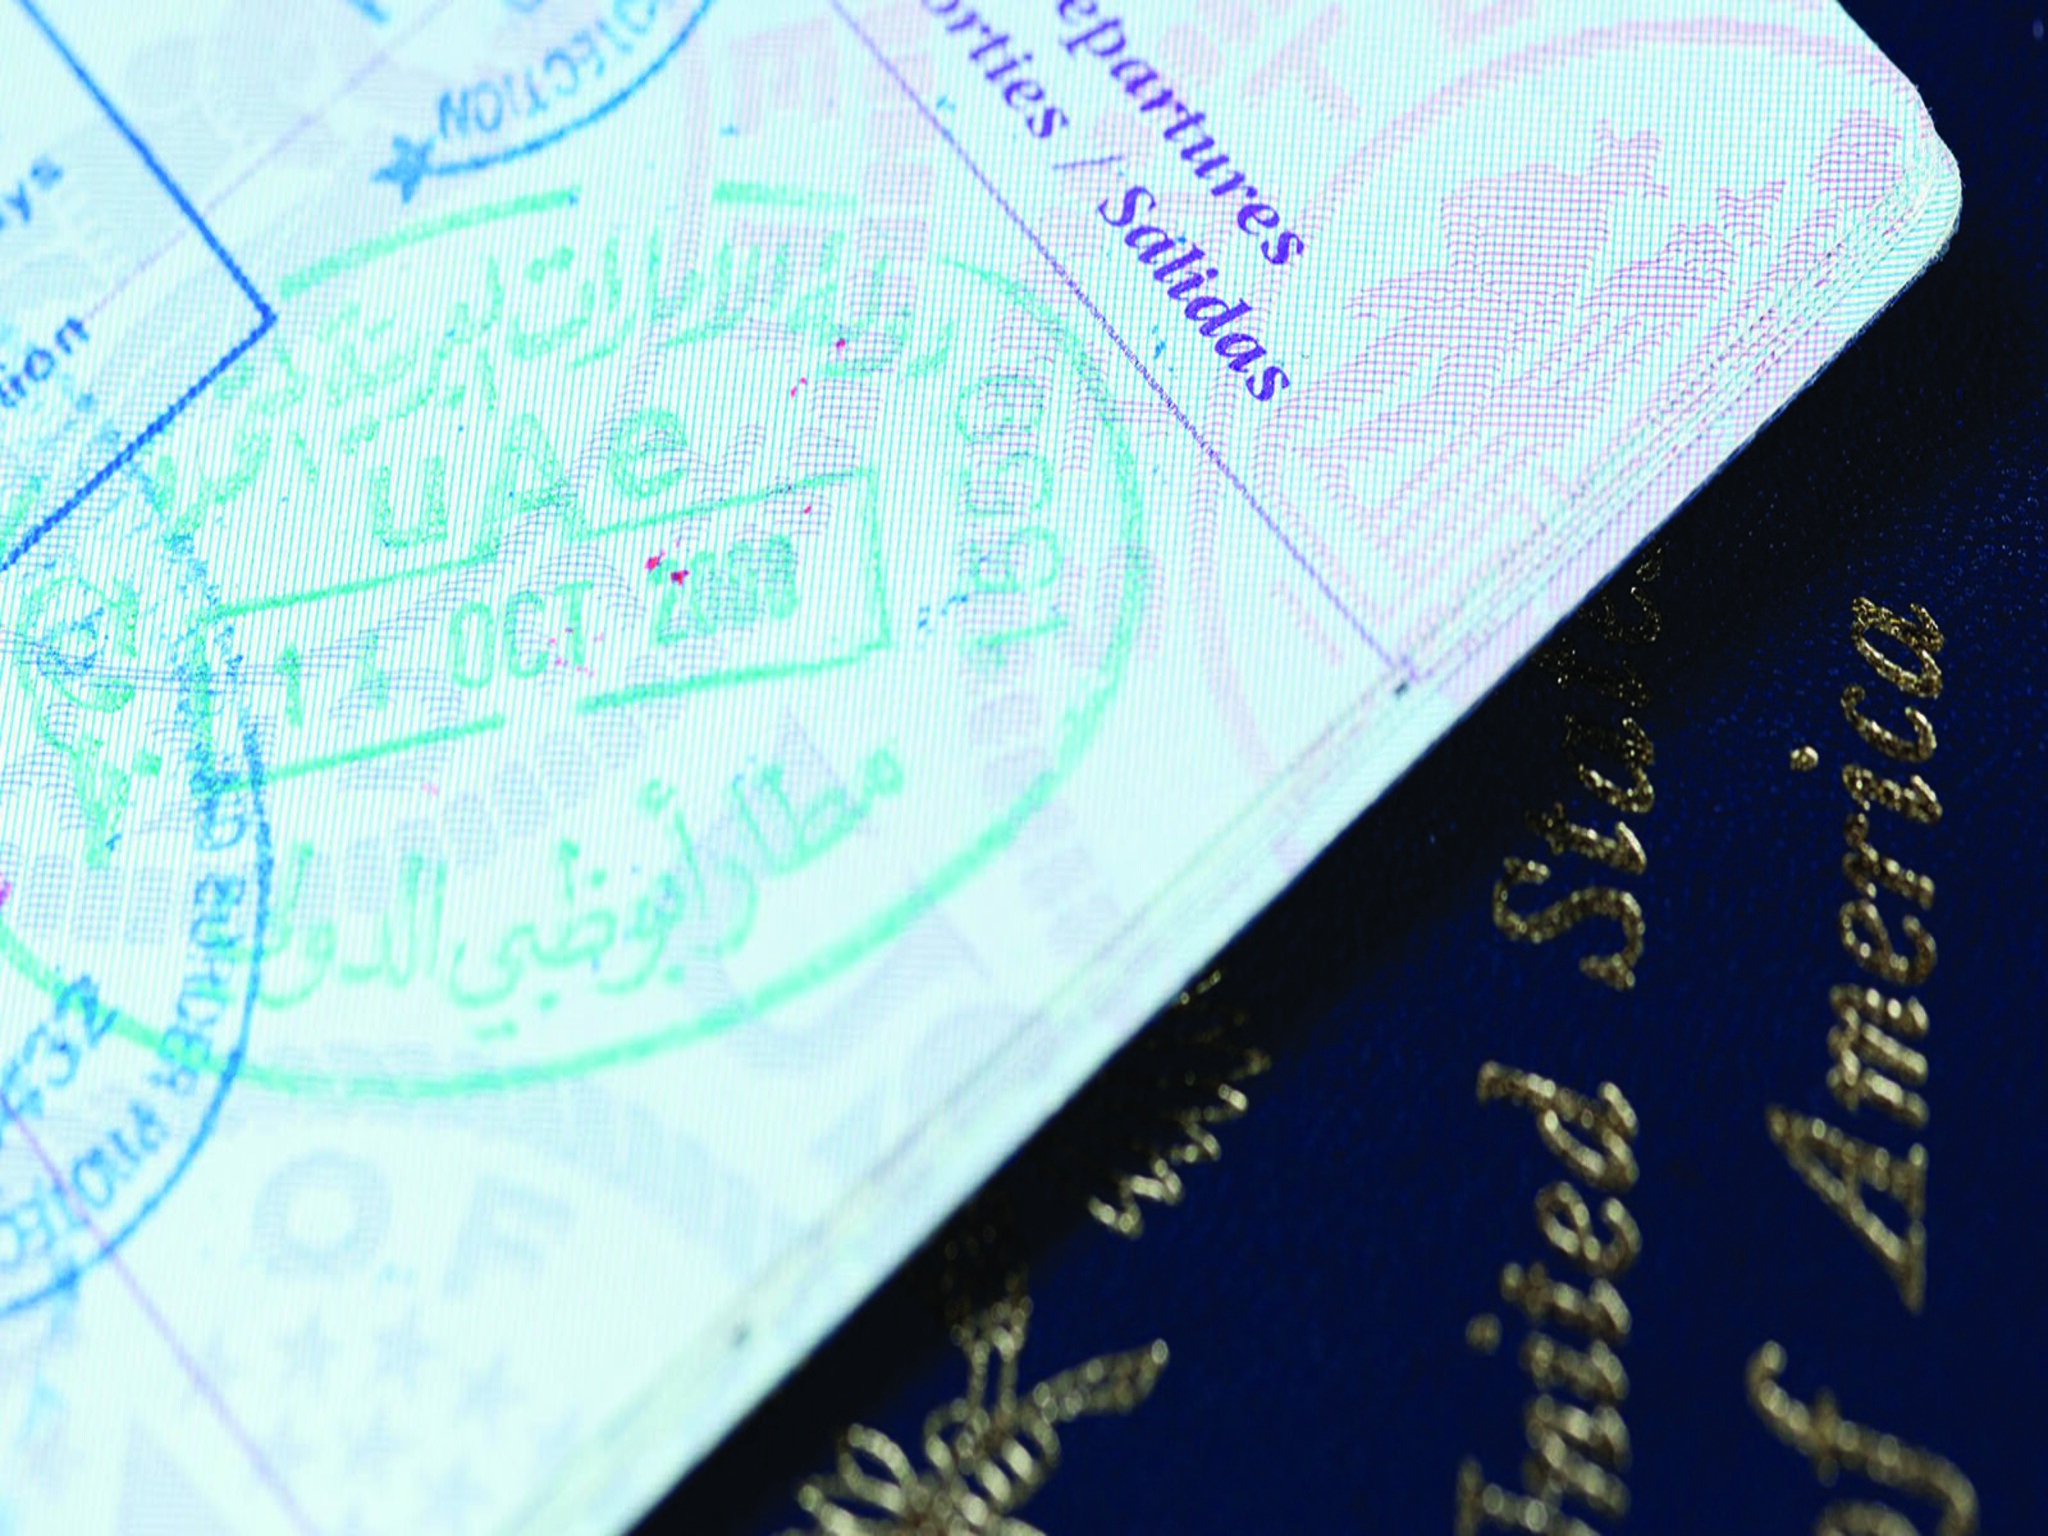 UAE issues visa on arrival for 90 days for these 87 countries